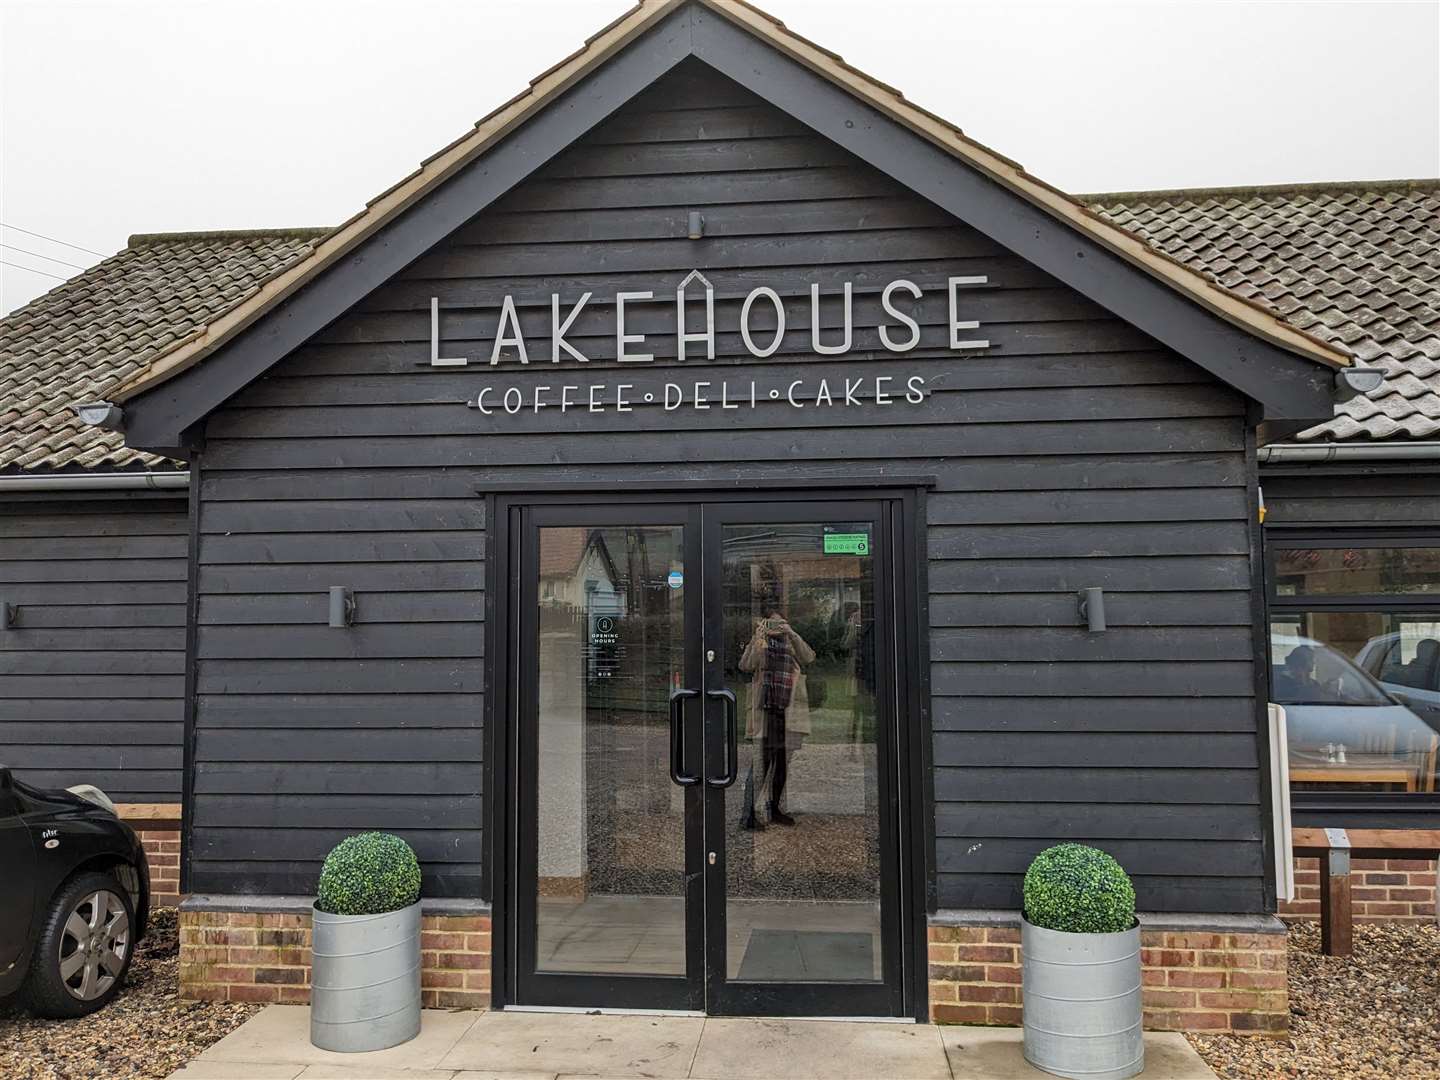 The Lakehouse Café is in the village of Onehouse just a few miles out of Stowmarket. Picture: Suzanne Day